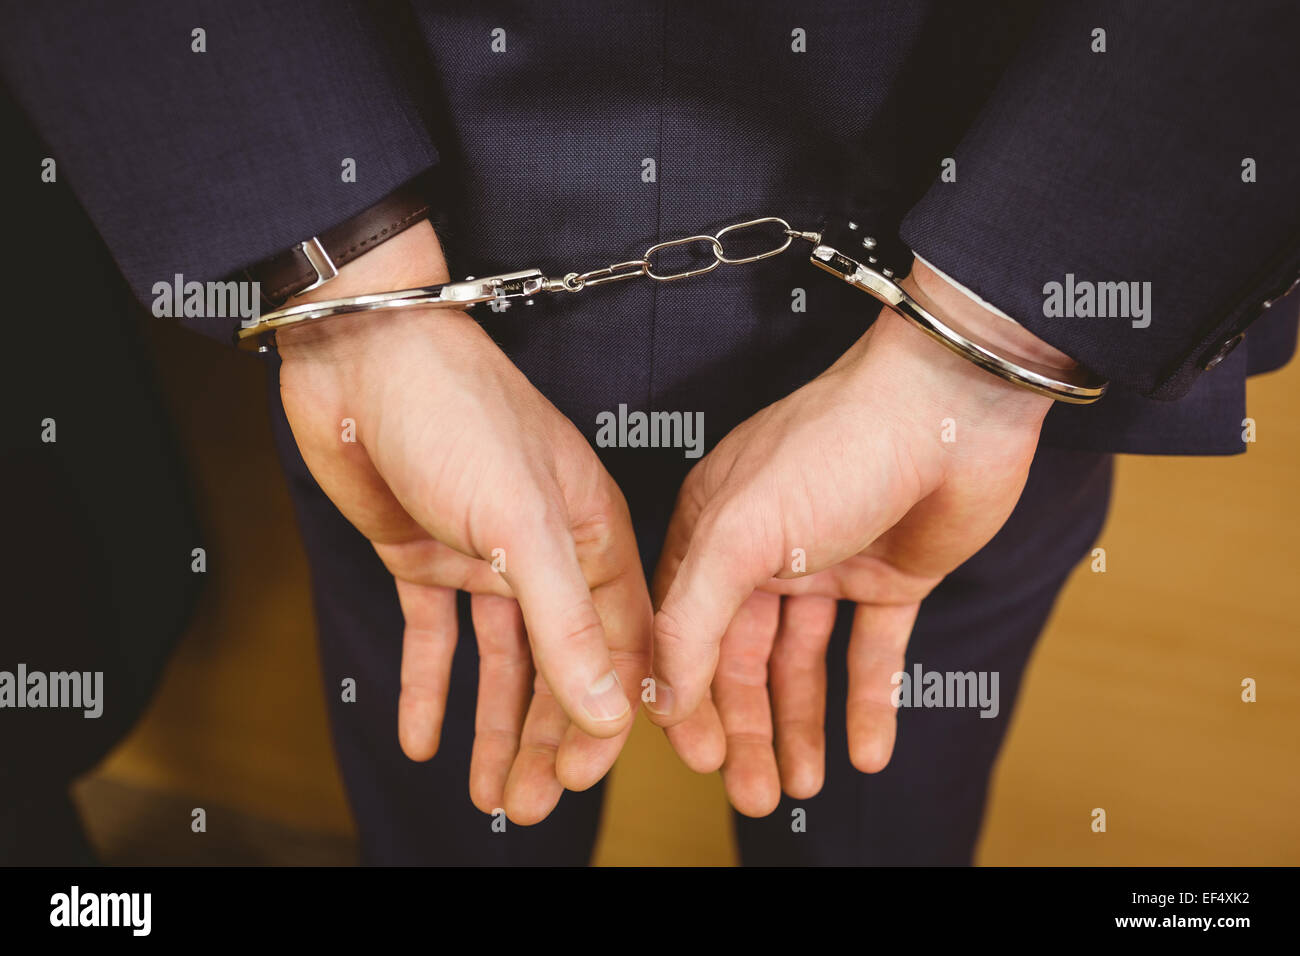 Hands of businessman with handcuffs Stock Photo